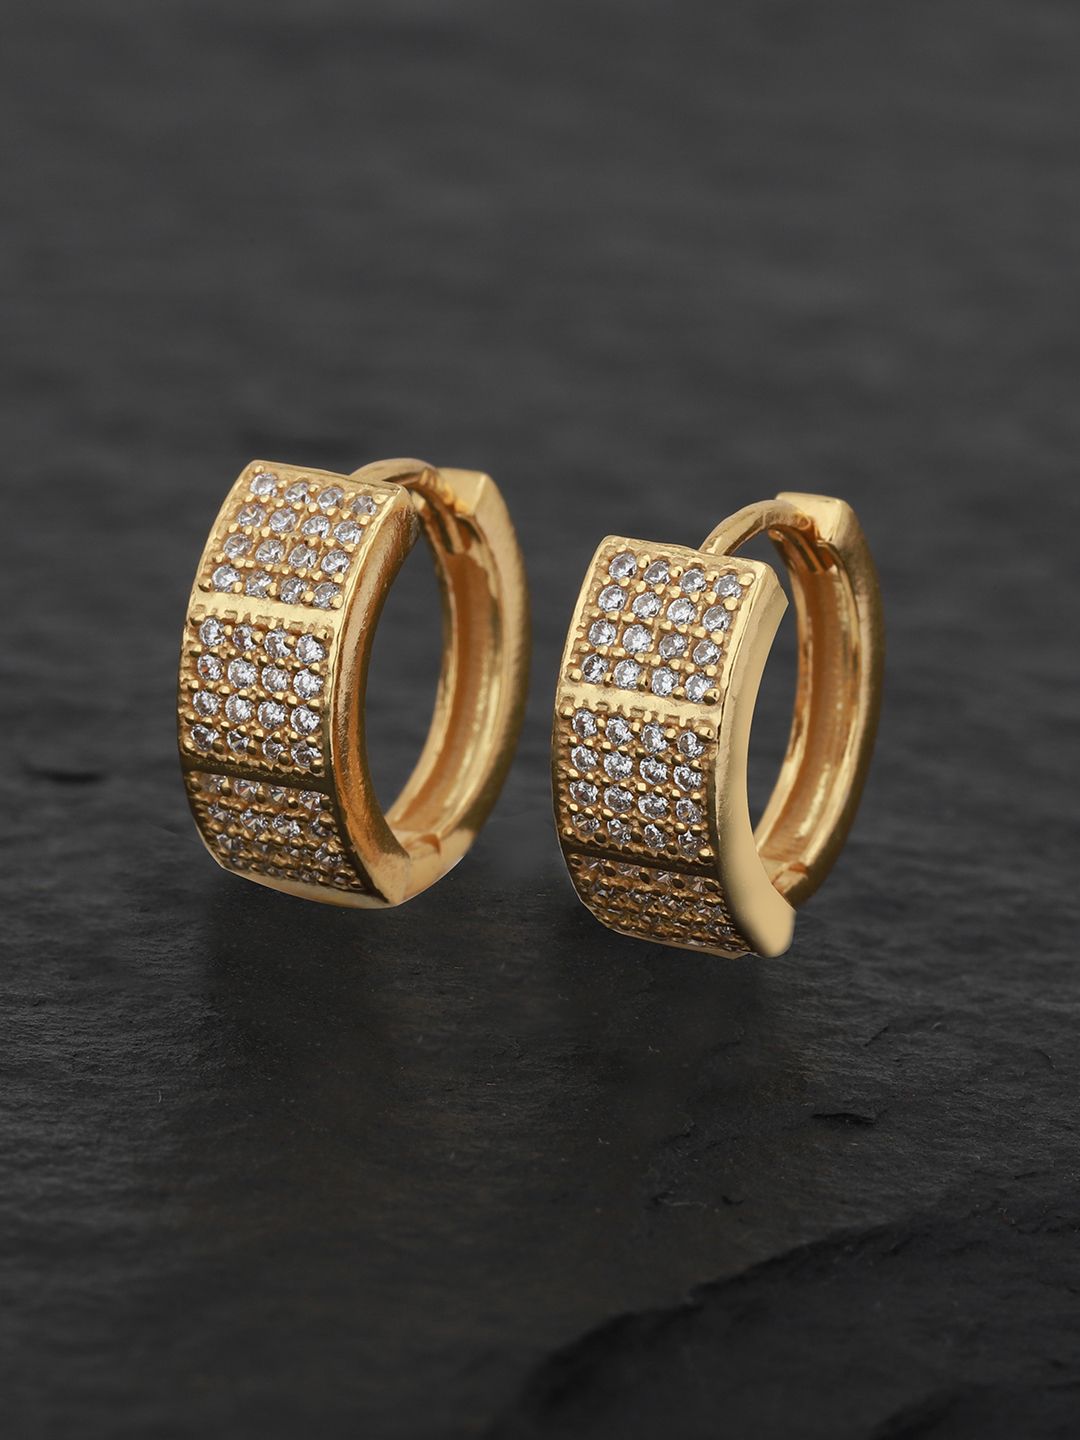 Carlton London Gold-Plated CZ Studded Circular Hoop Earrings Price in India